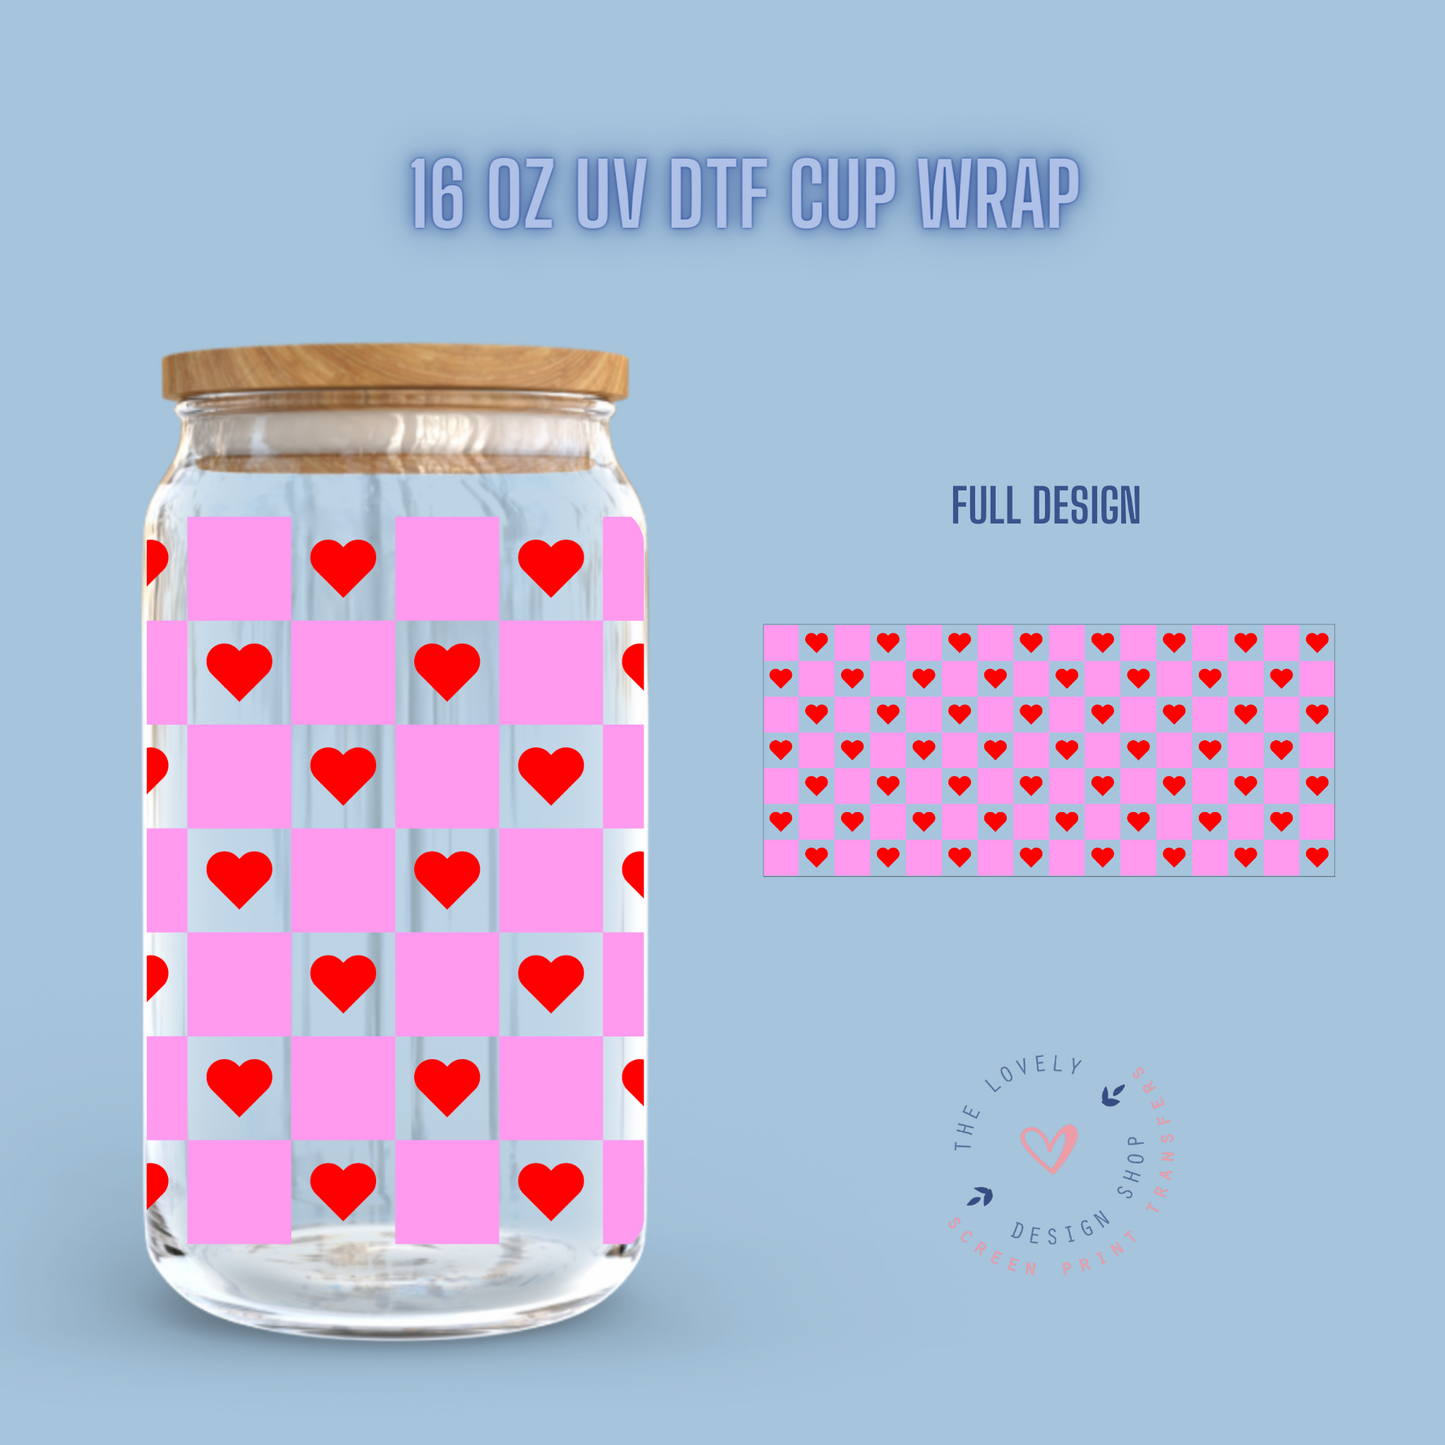 Full Hearts Checkered - UV DTF 16 oz Libbey Cup Wrap (Ready to Ship)